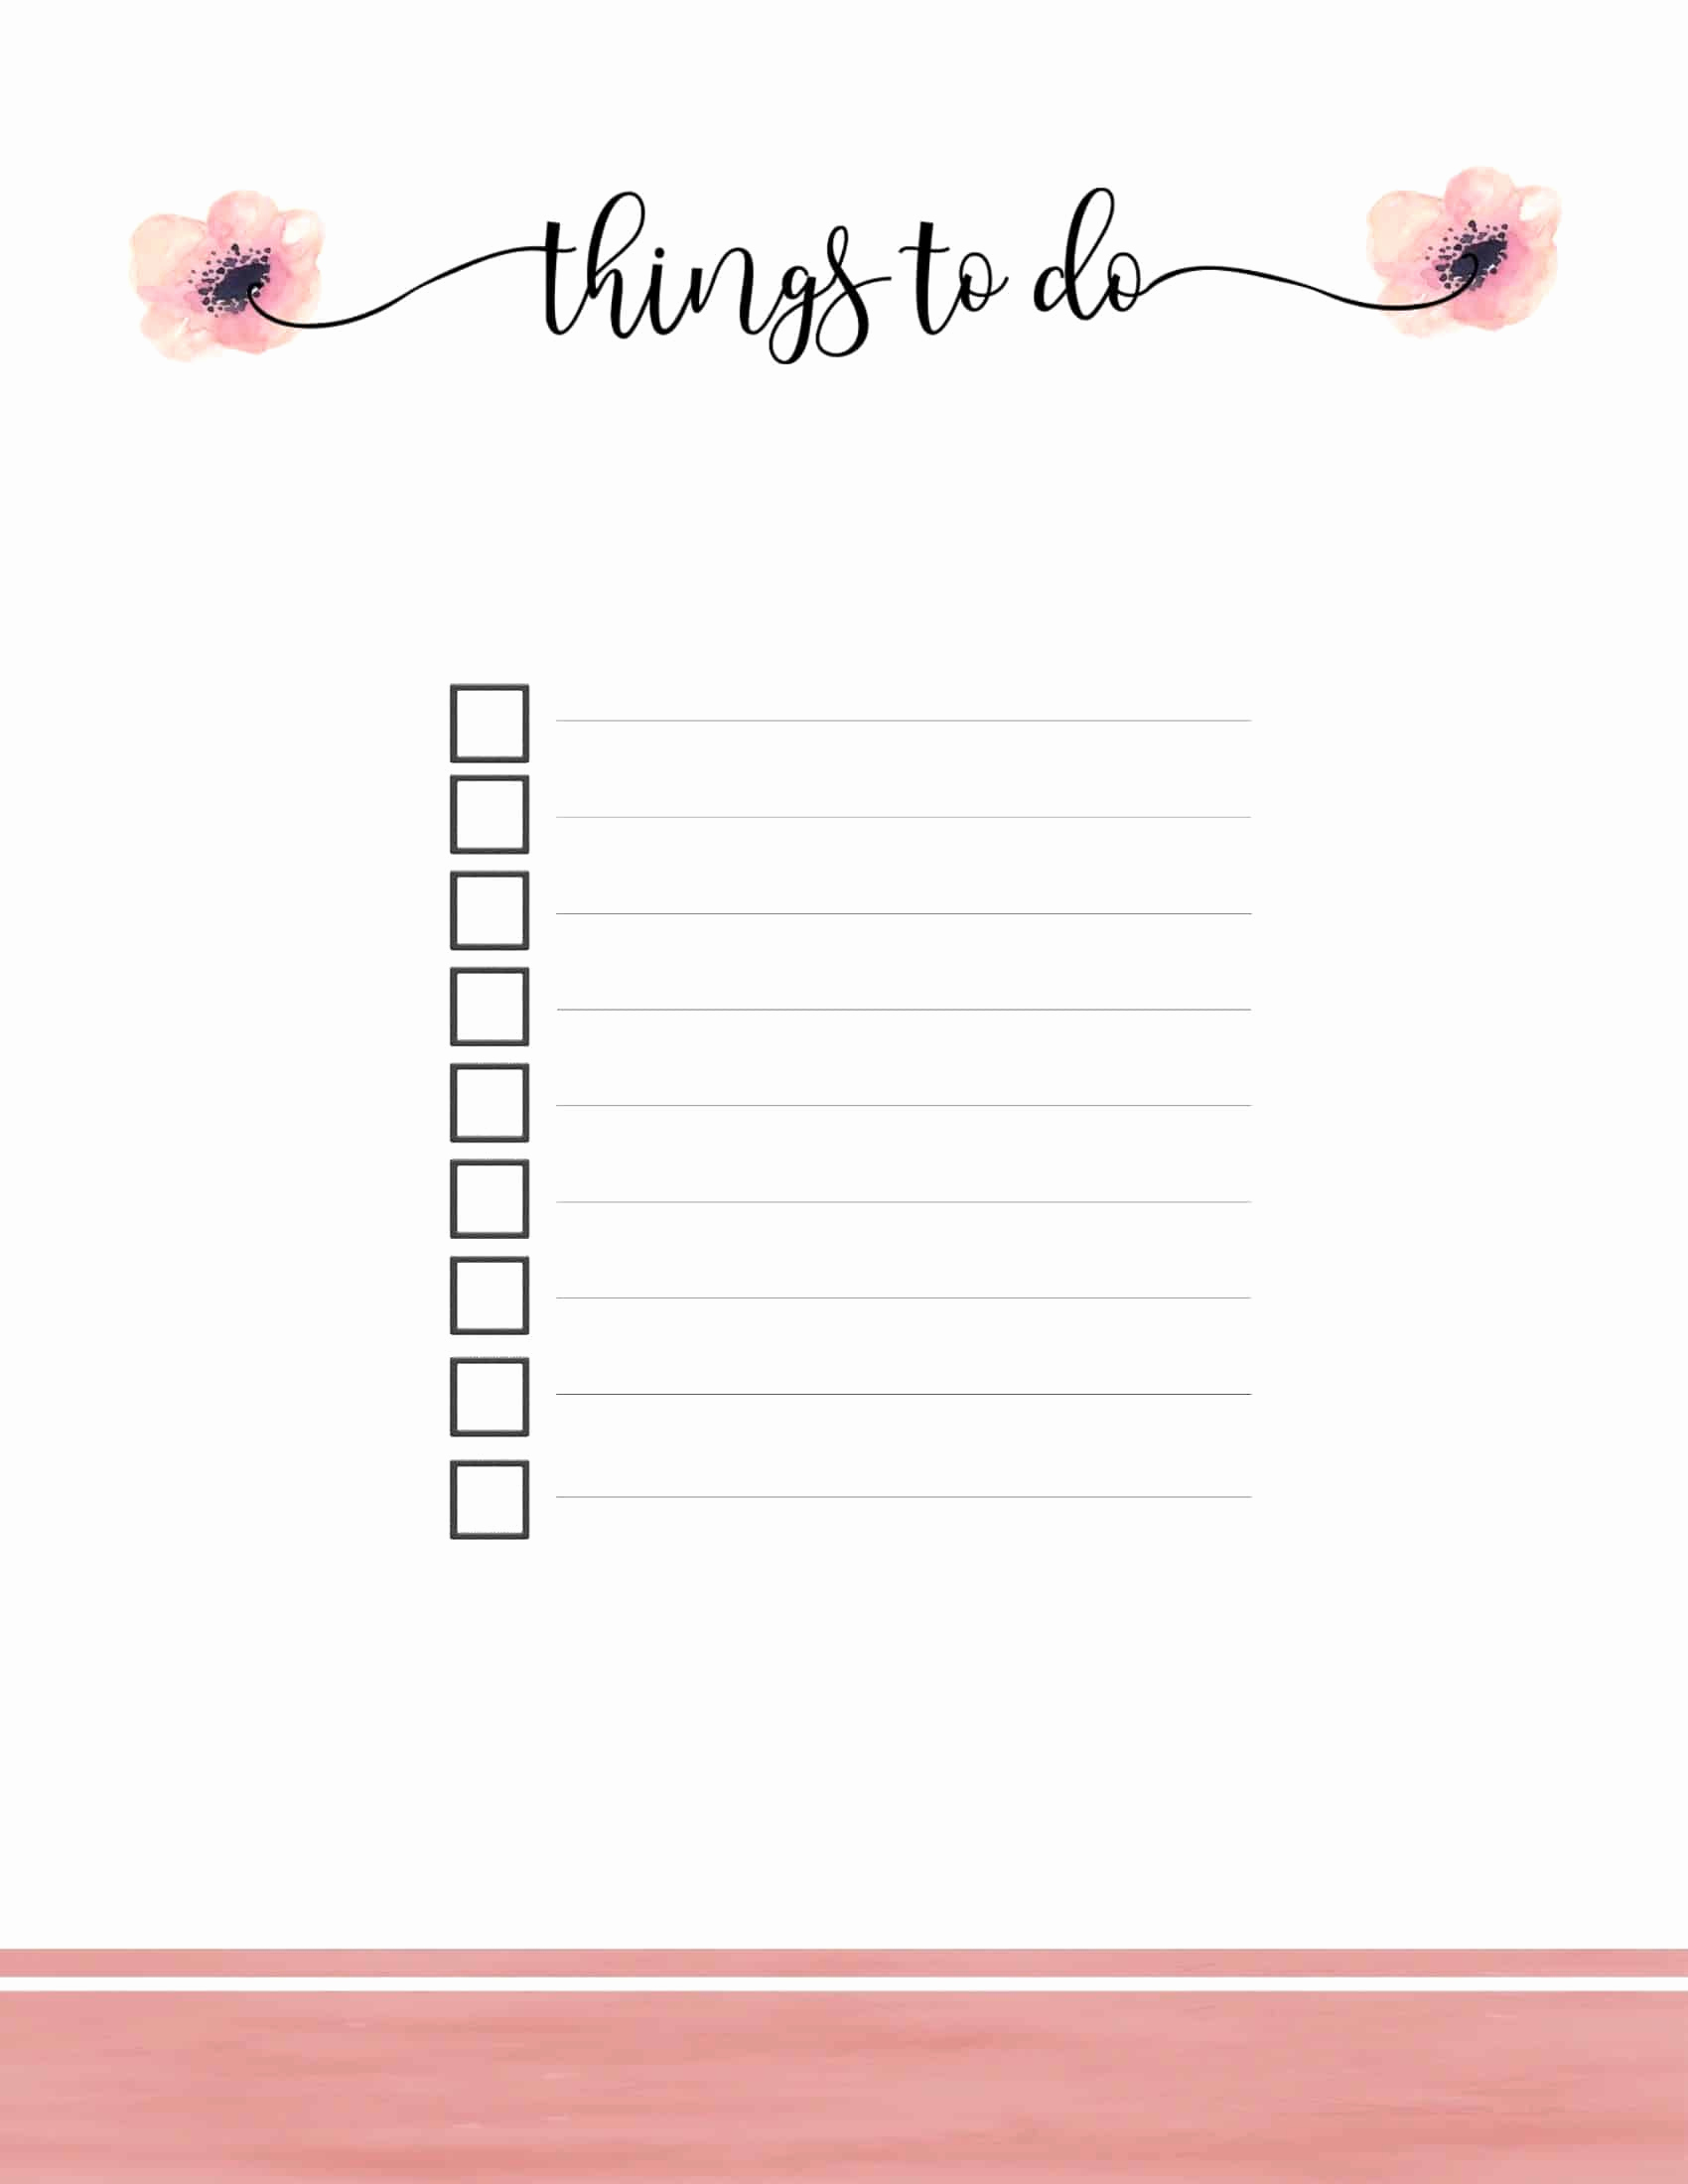 Things to Do List Template New Free Printable to Do List Print or Use Line